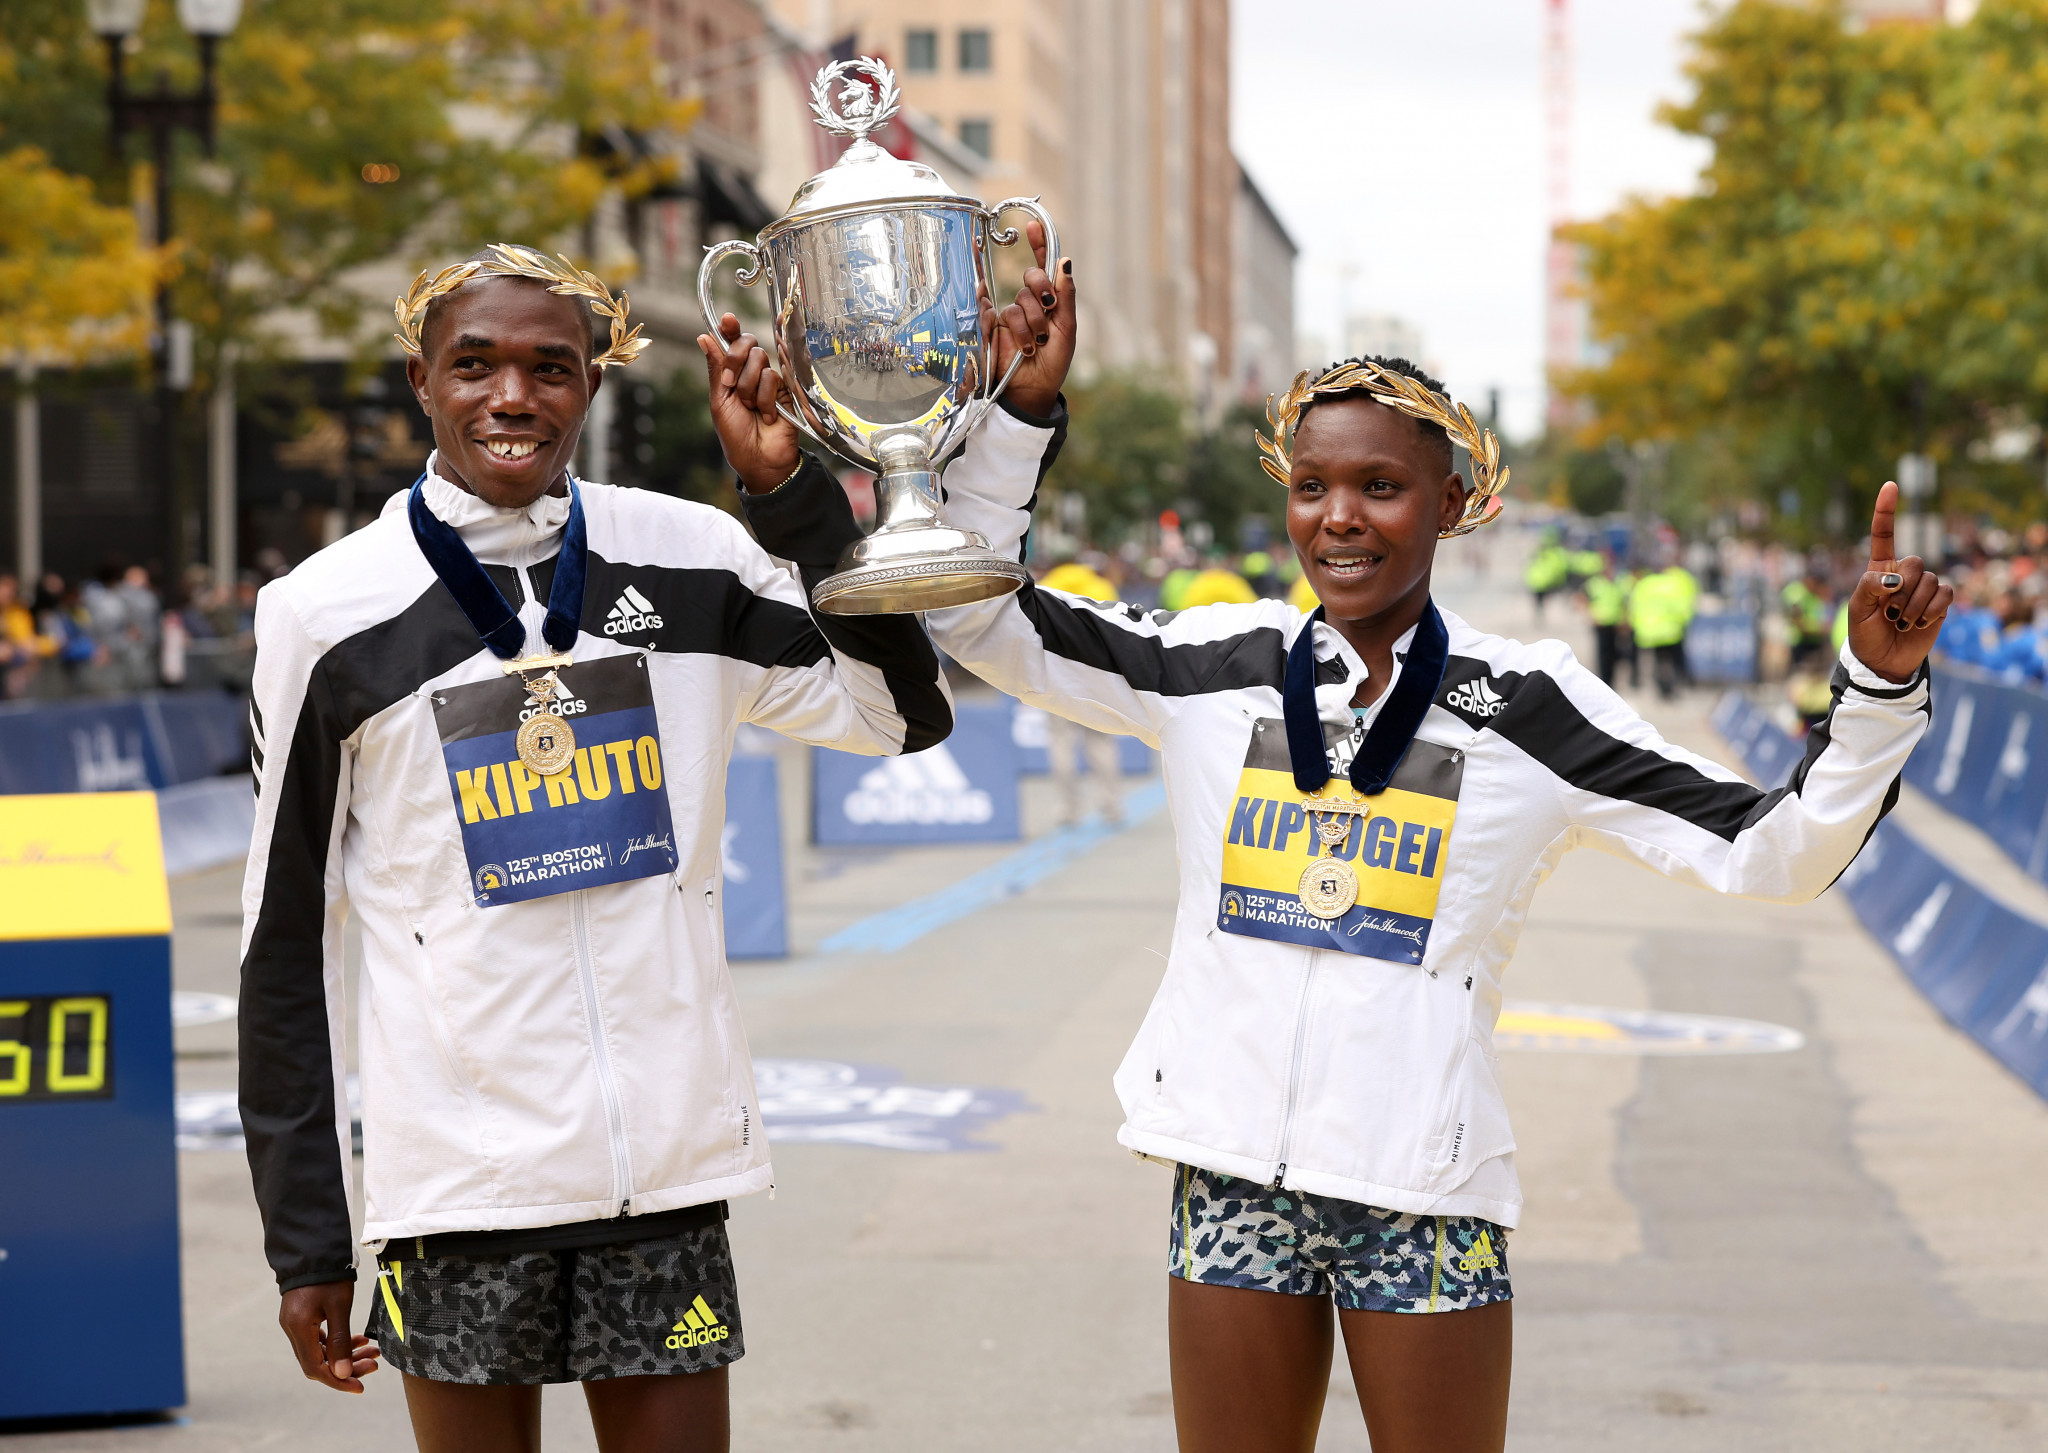 Kenyans Benson Kipruto, left, and Diana Kipyogei, right, won the men's and women's race respectively at the 125th Boston Marathon ©Getty Images